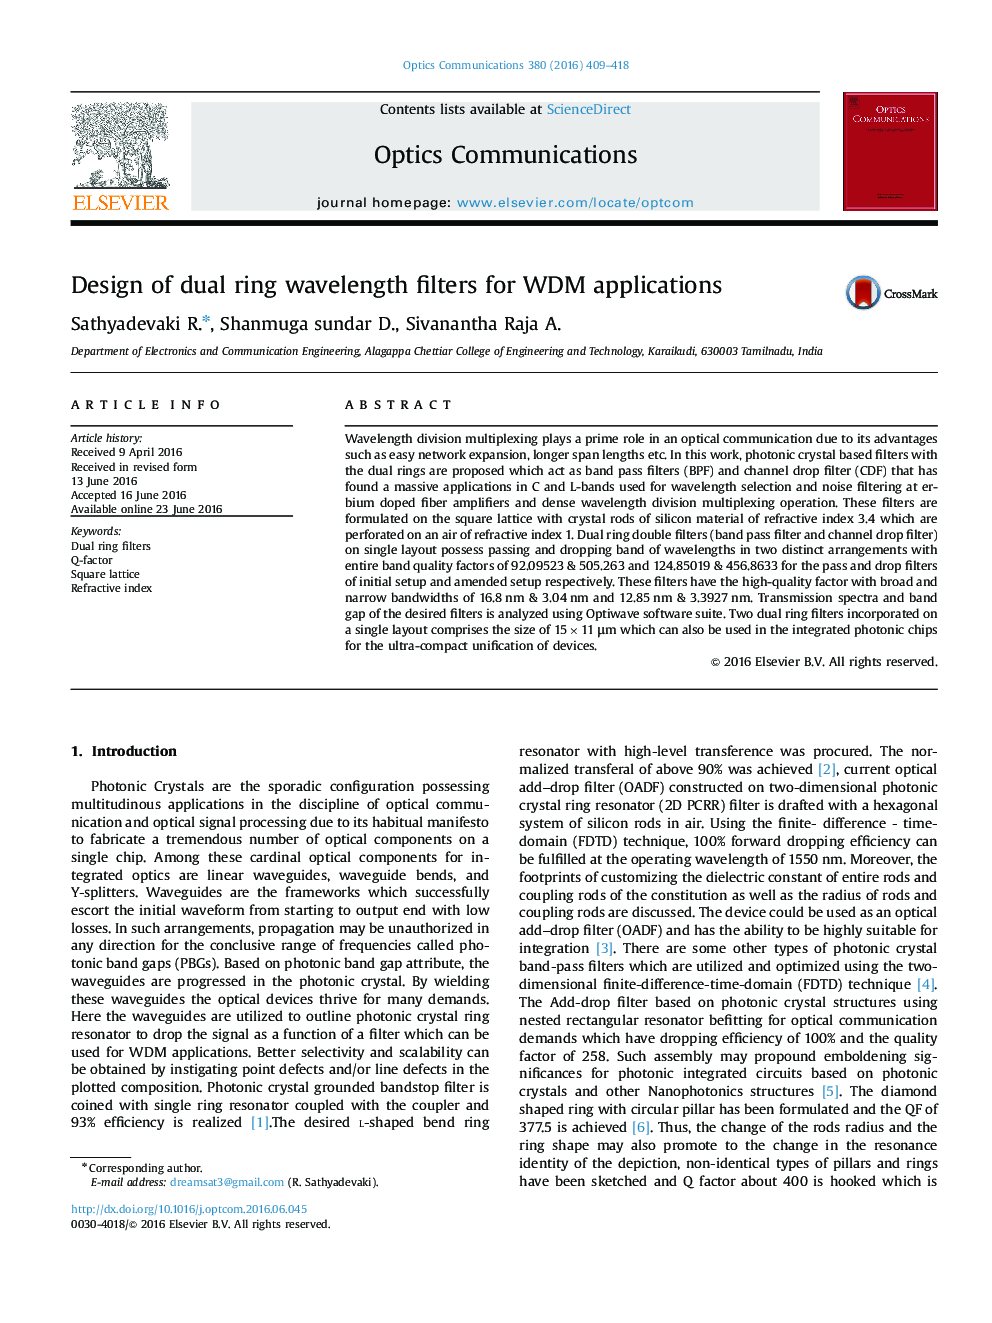 Design of dual ring wavelength filters for WDM applications